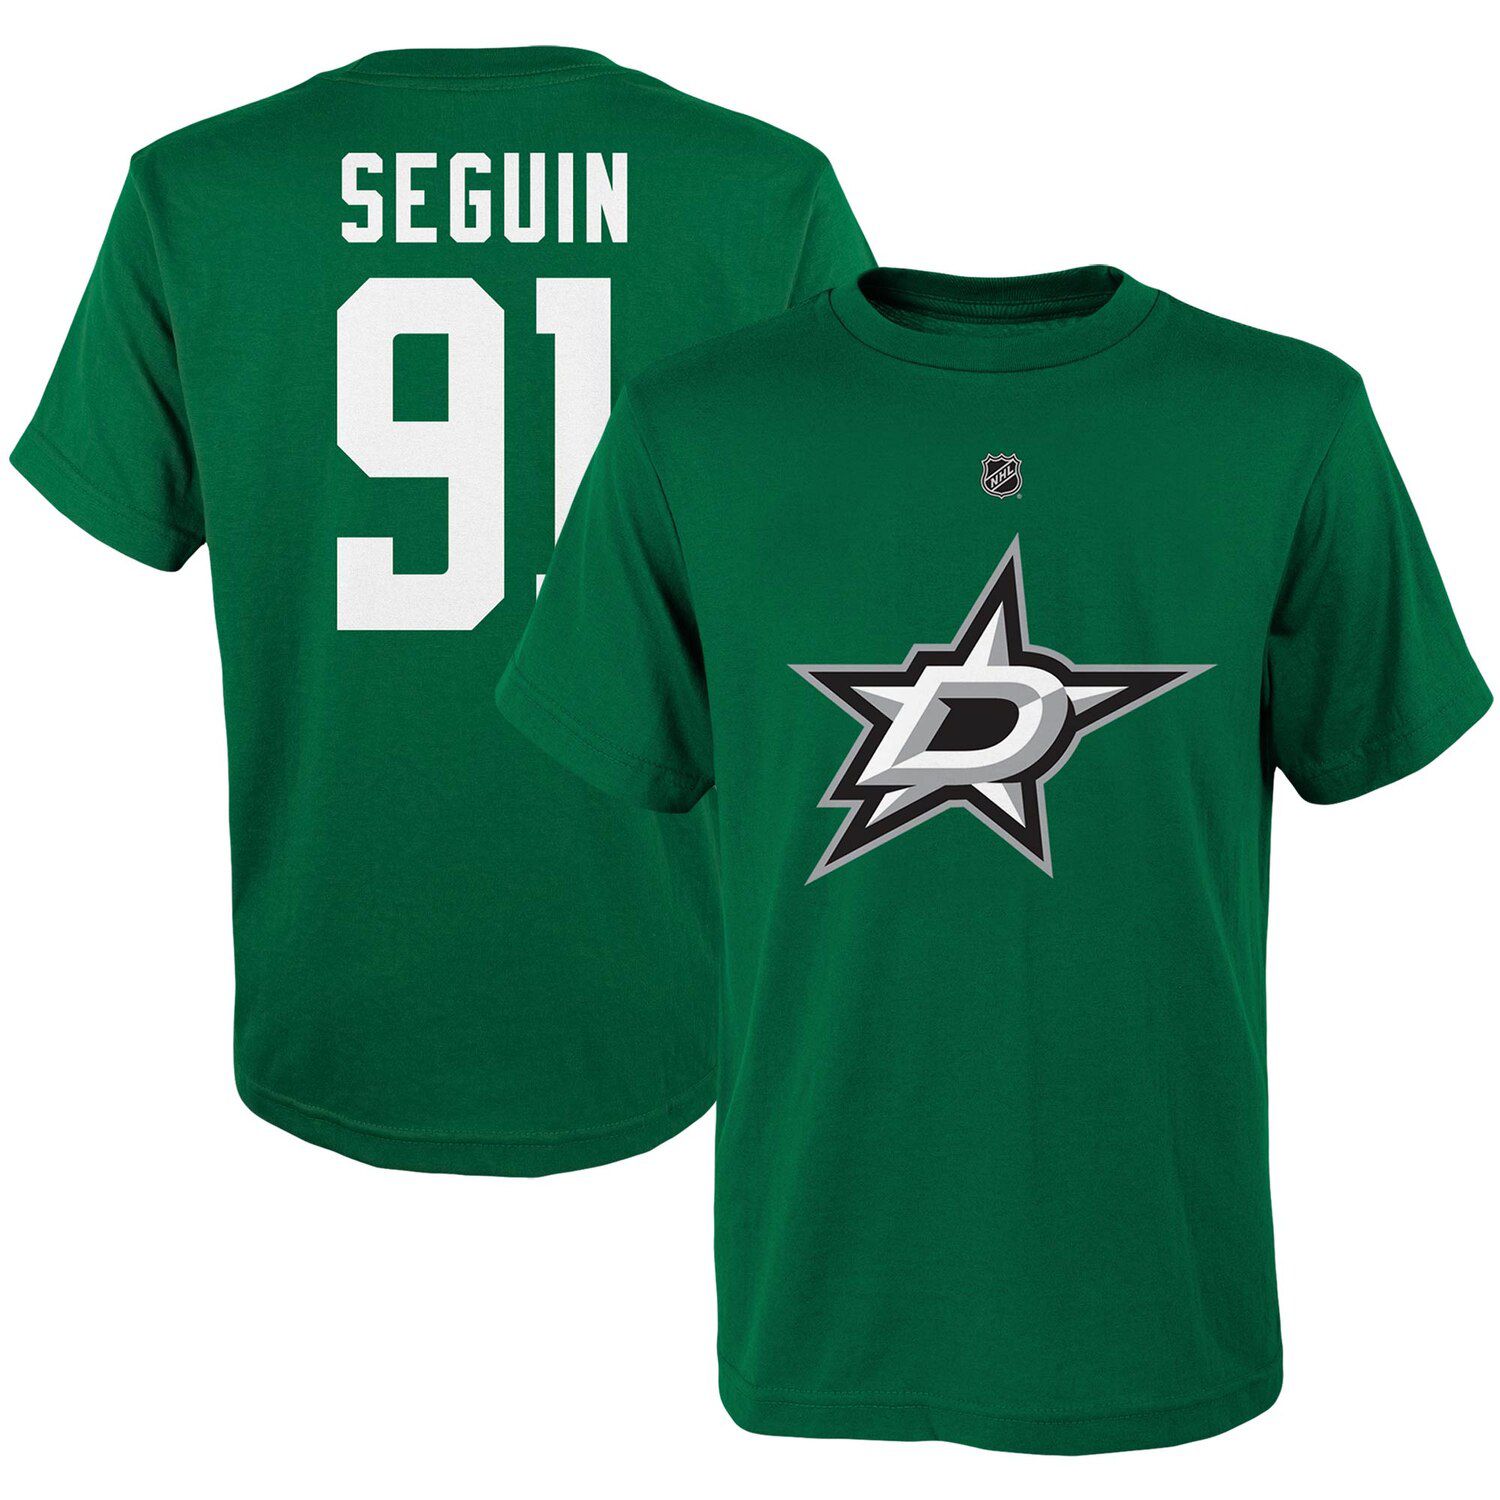 youth tyler seguin jersey